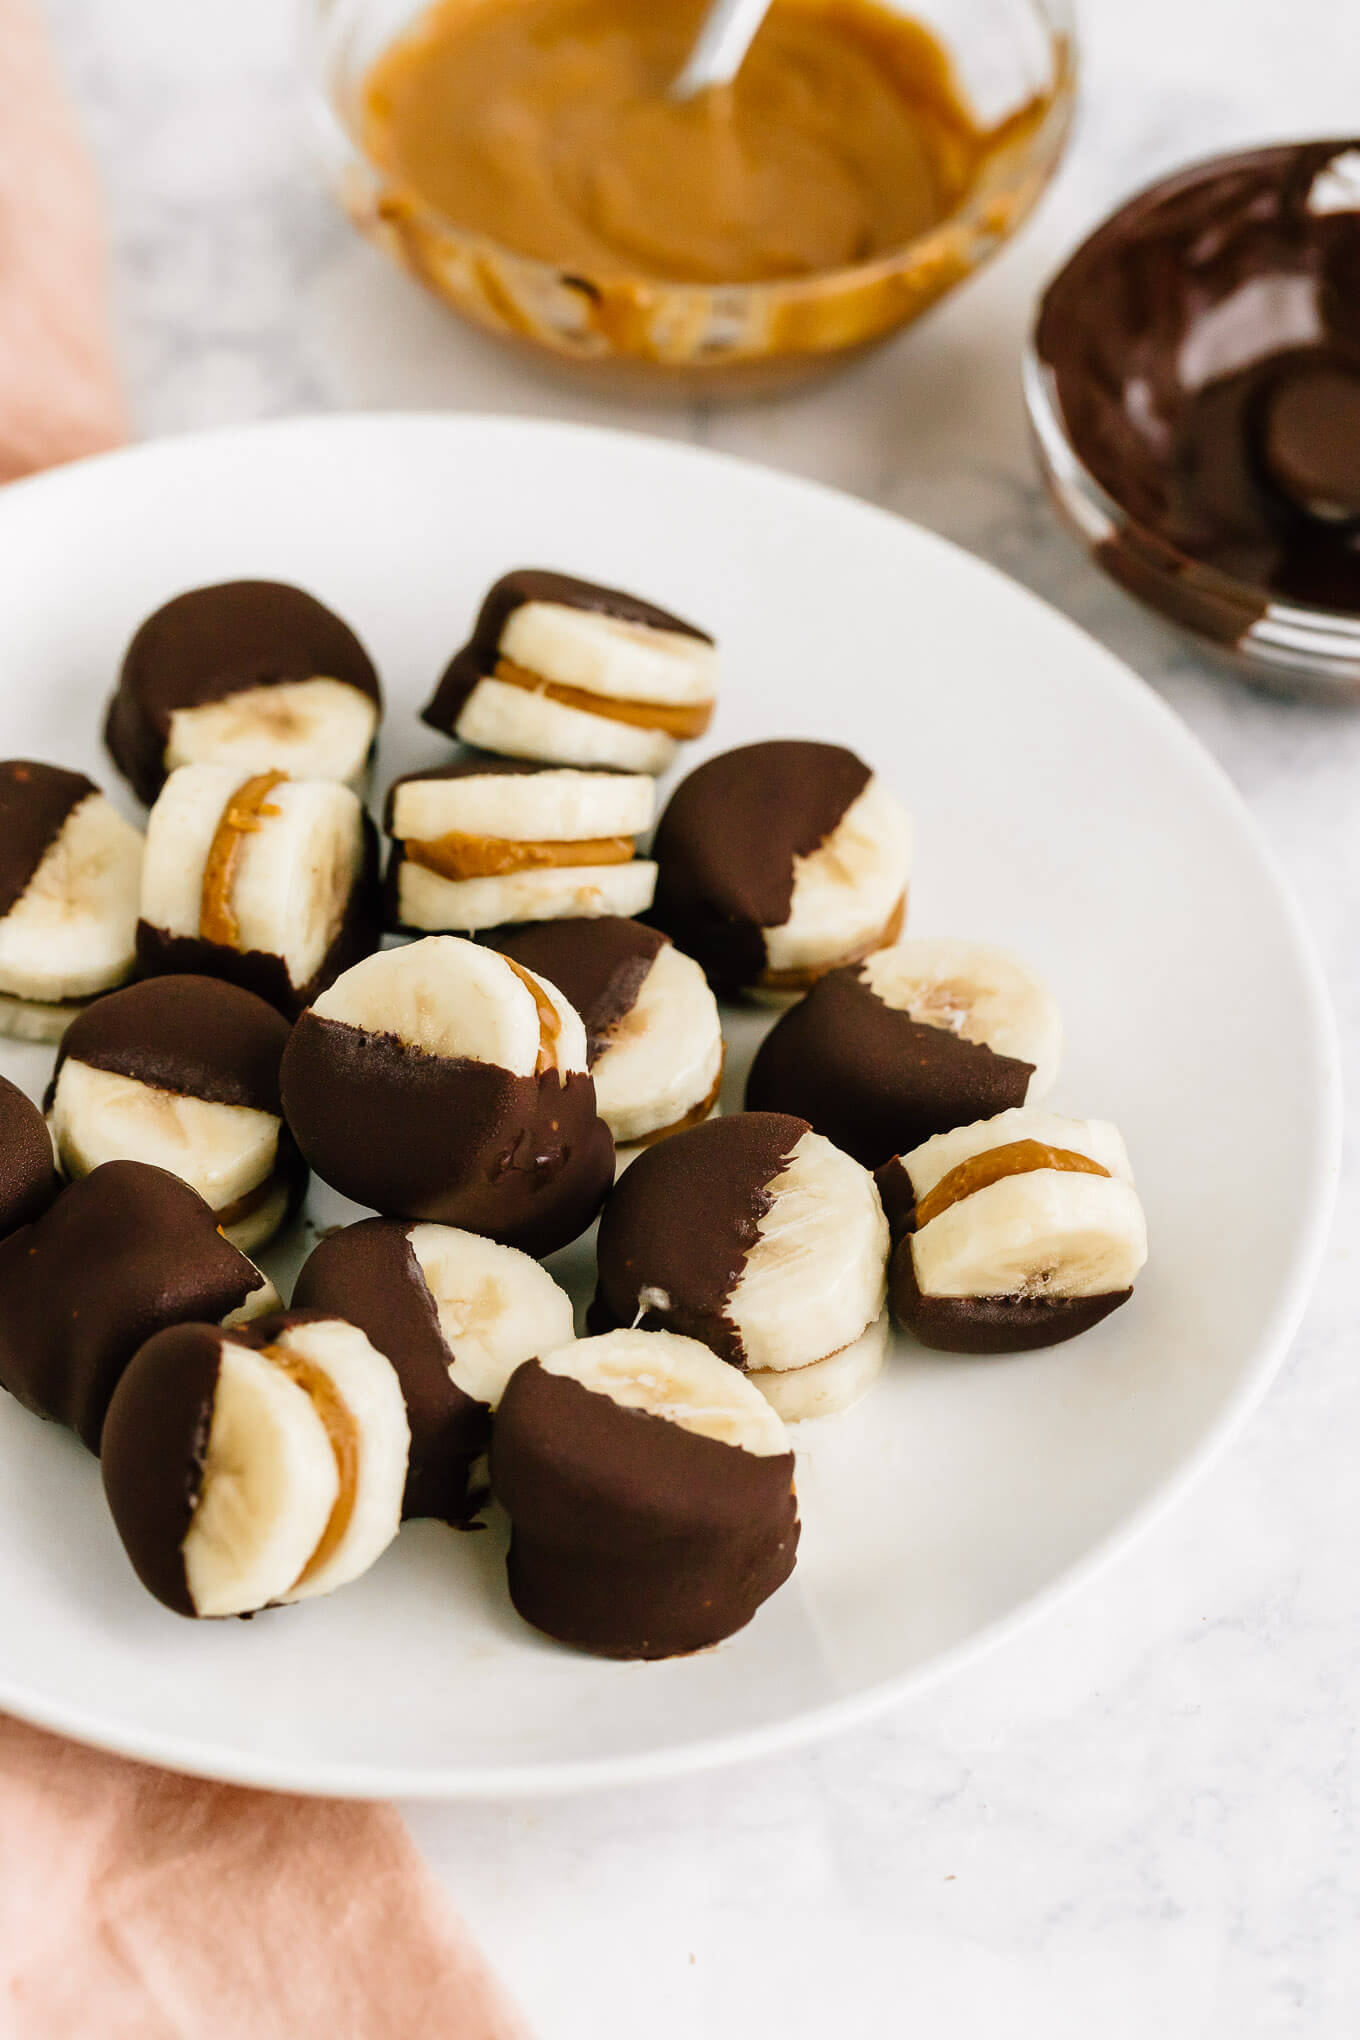 These frozen chocolate covered peanut butter banana bites are the perfect healthy frozen treat.